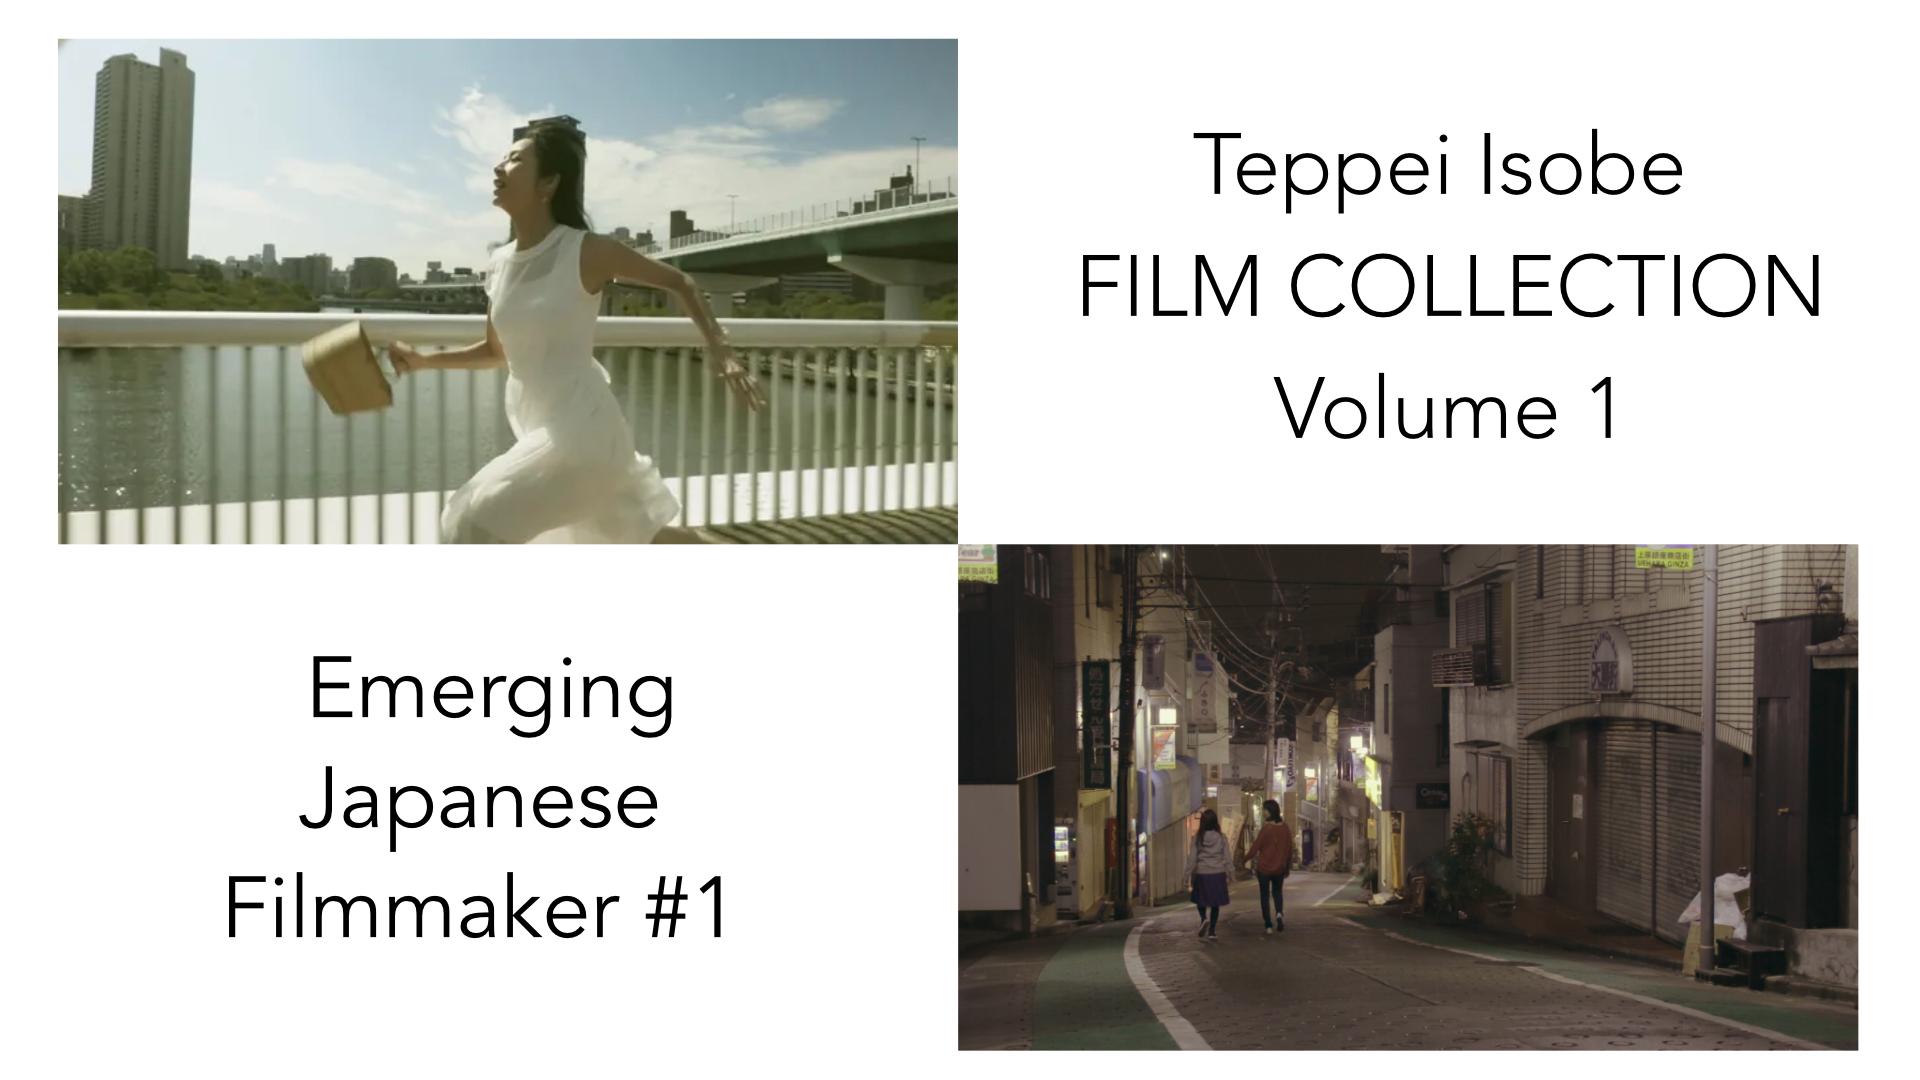 Teppei Isobe Film Collection Vol.1